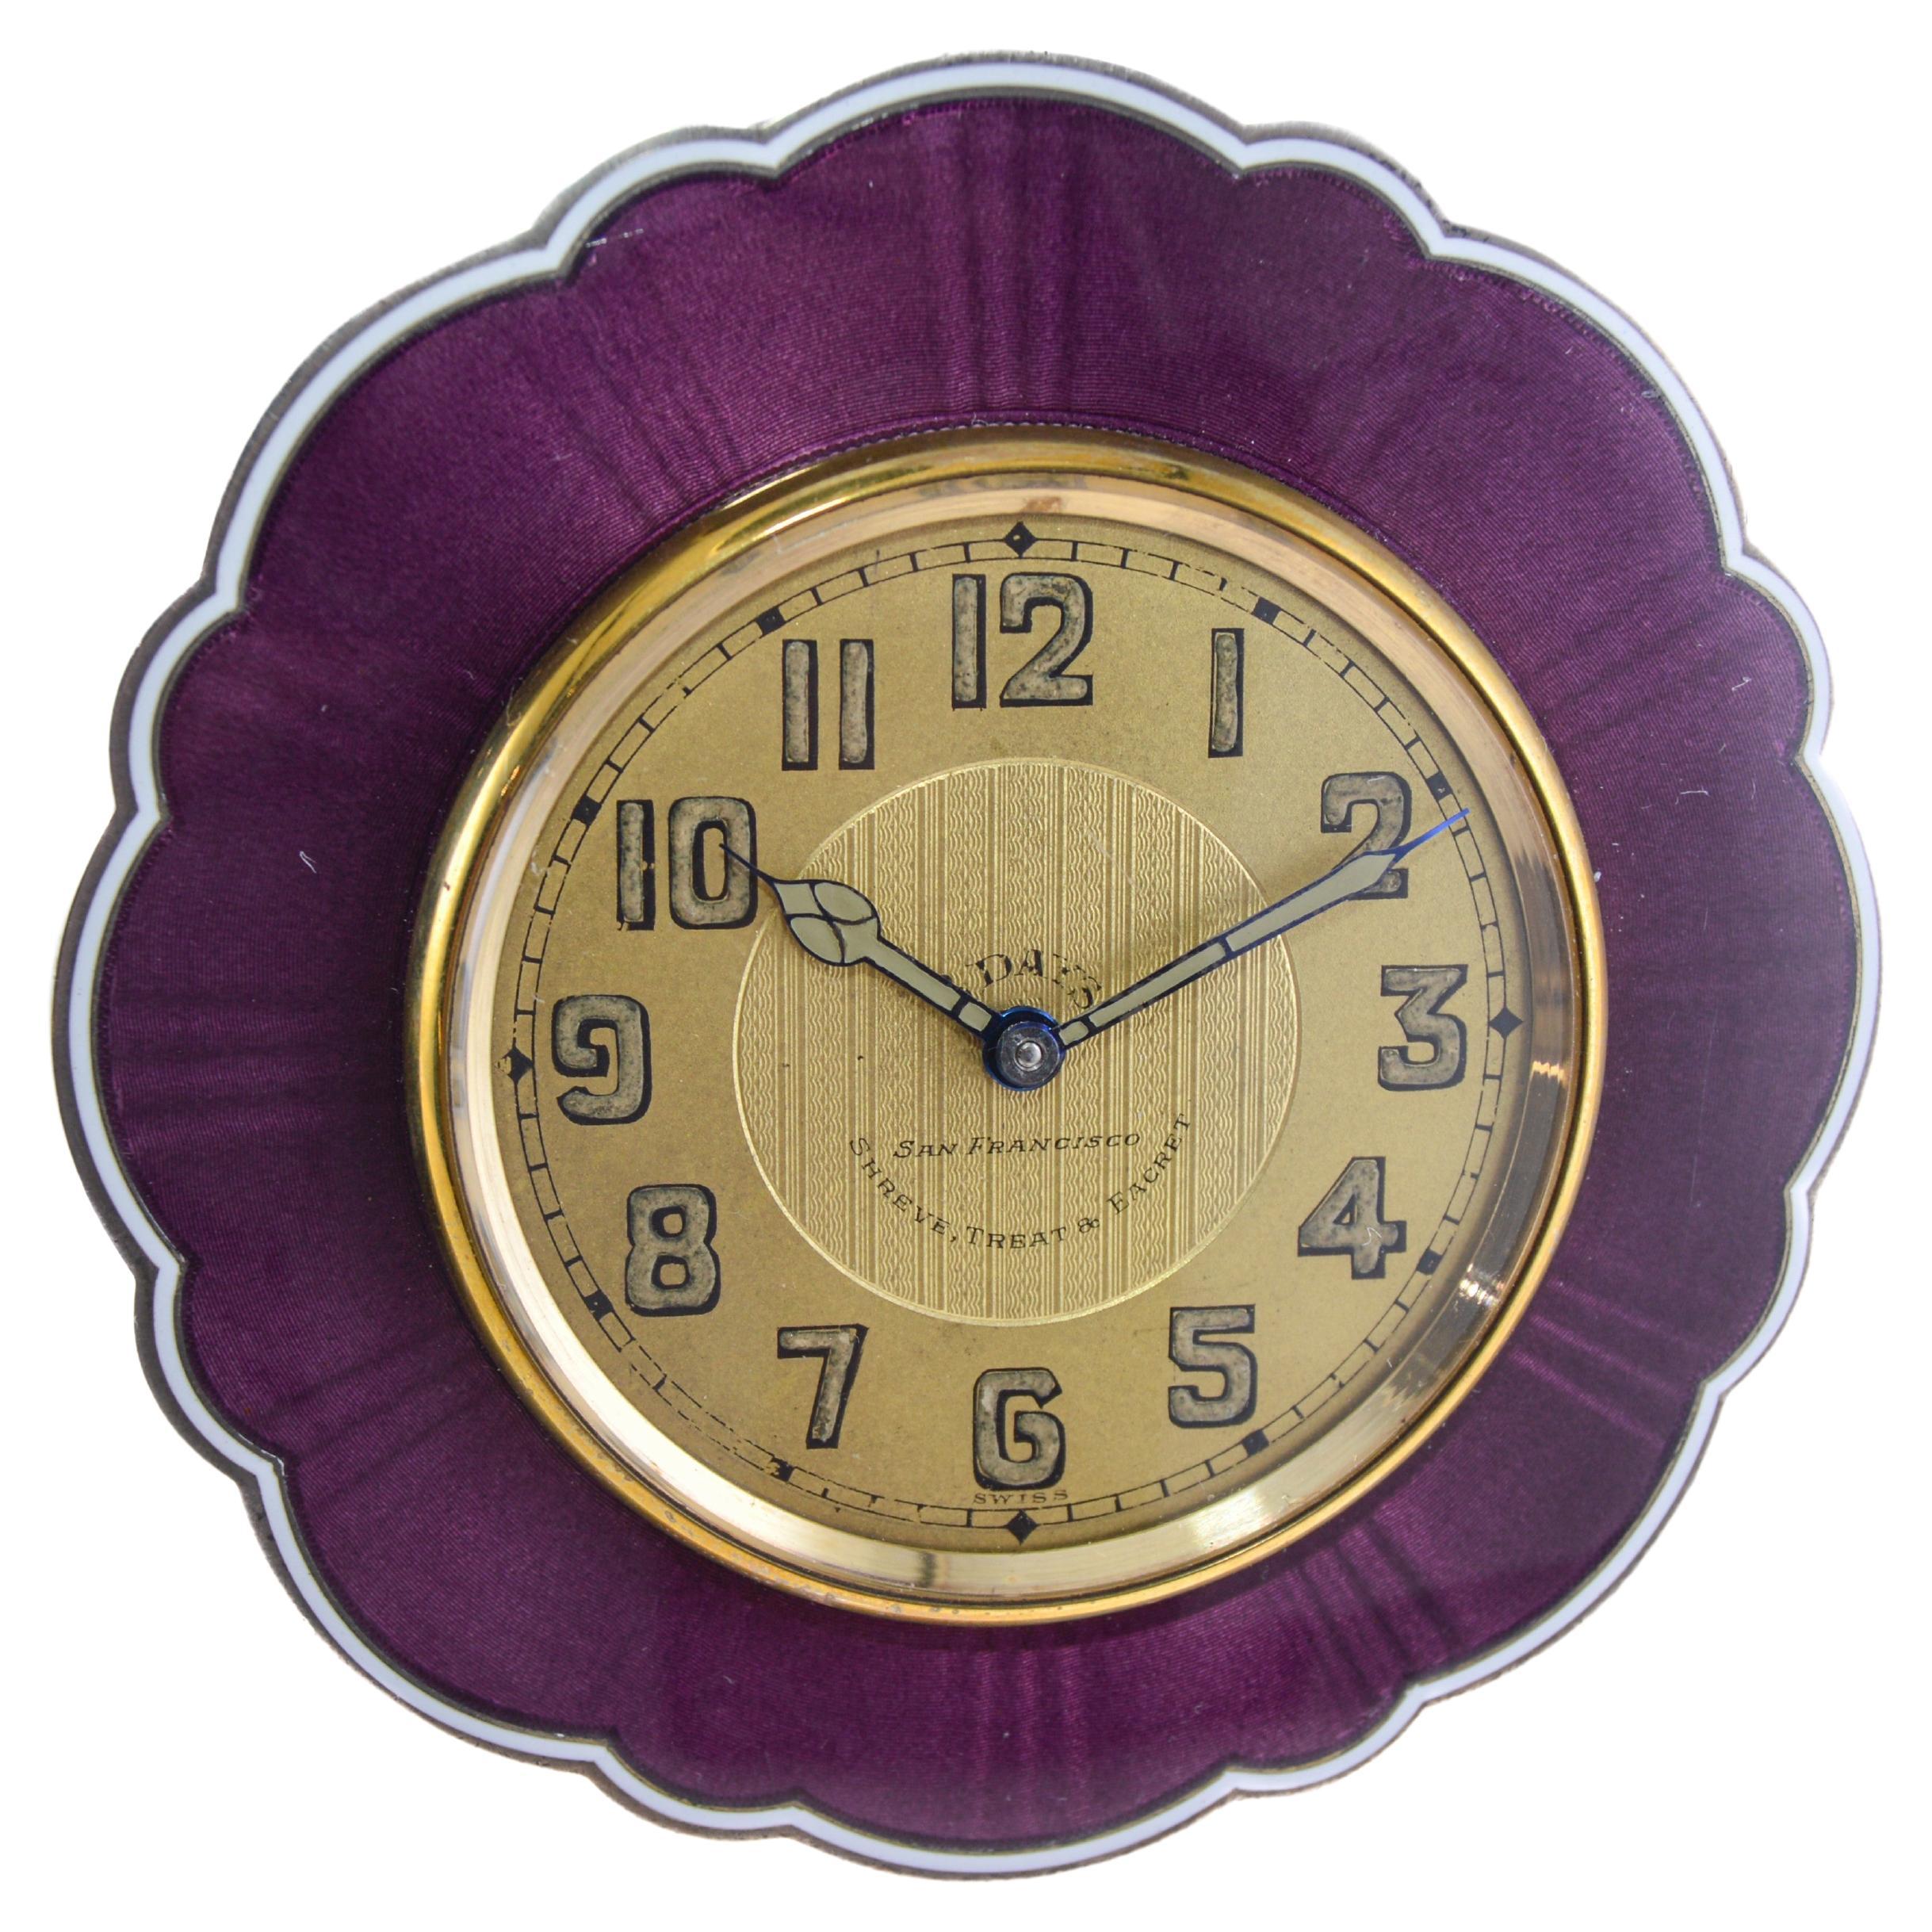 FACTORY / HOUSE: Shreve & Co.
STYLE / REFERENCE: Art Deco Desk Clock
METAL / MATERIAL: Sterling Silver & Bronze / Kiln Fired Enamel
CIRCA / YEAR: 1920's
DIMENSIONS: 4 Inches X 4 Inches 
MOVEMENT / CALIBER: High Grade 8 Days
DIAL / HANDS: Gilt with